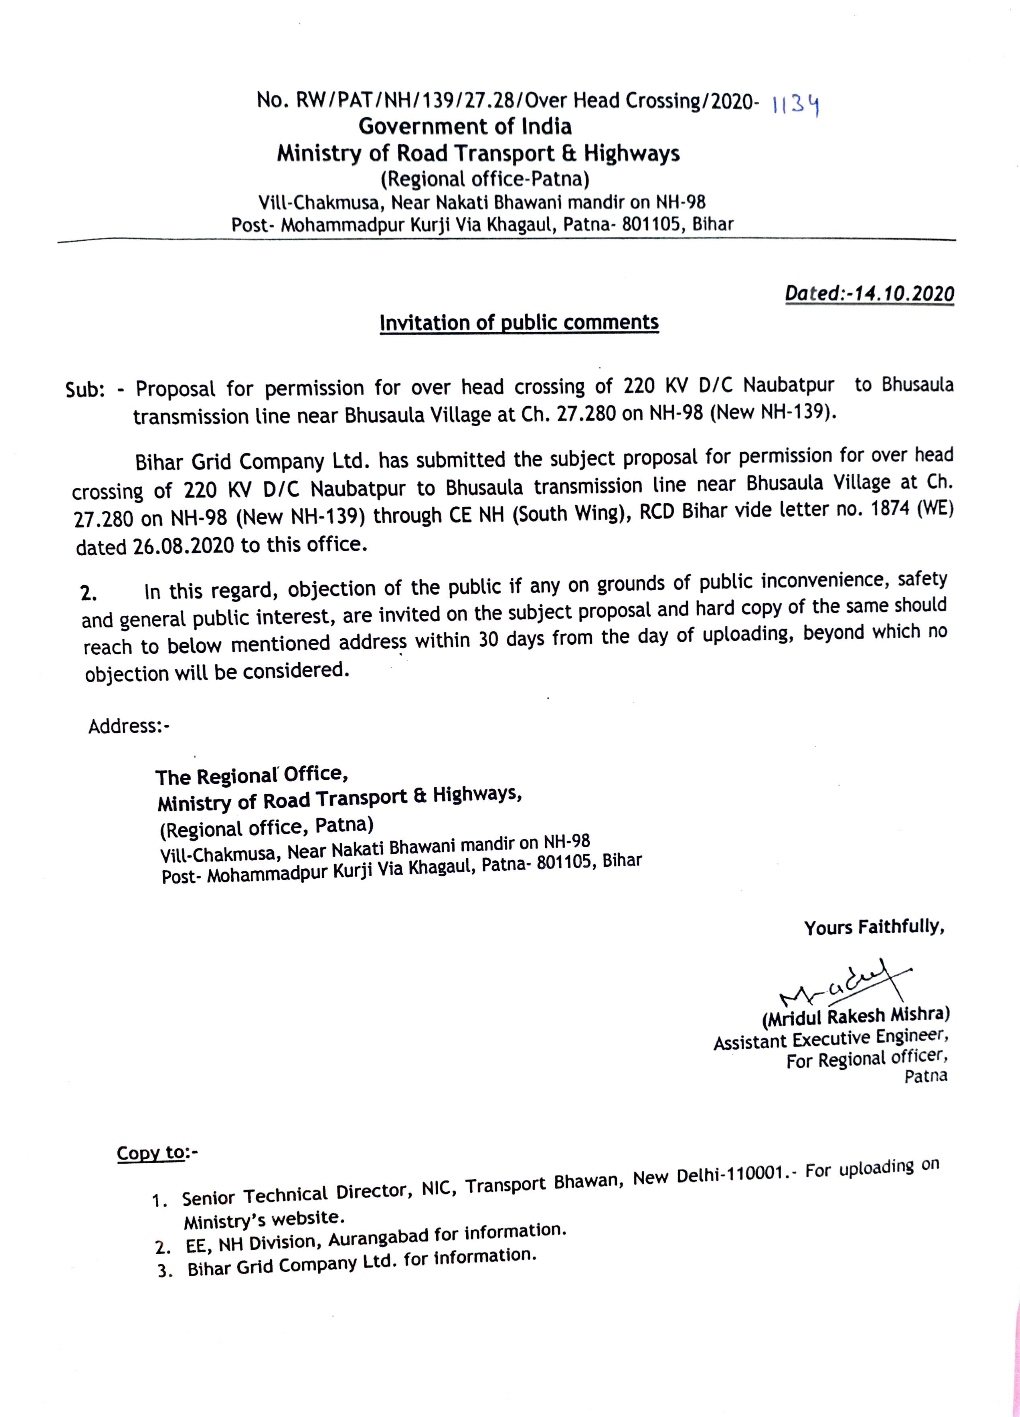 Proposal for Permission for Over Head Crossing of 220 KV D/C Naubatpur to Bhusaula Transmission